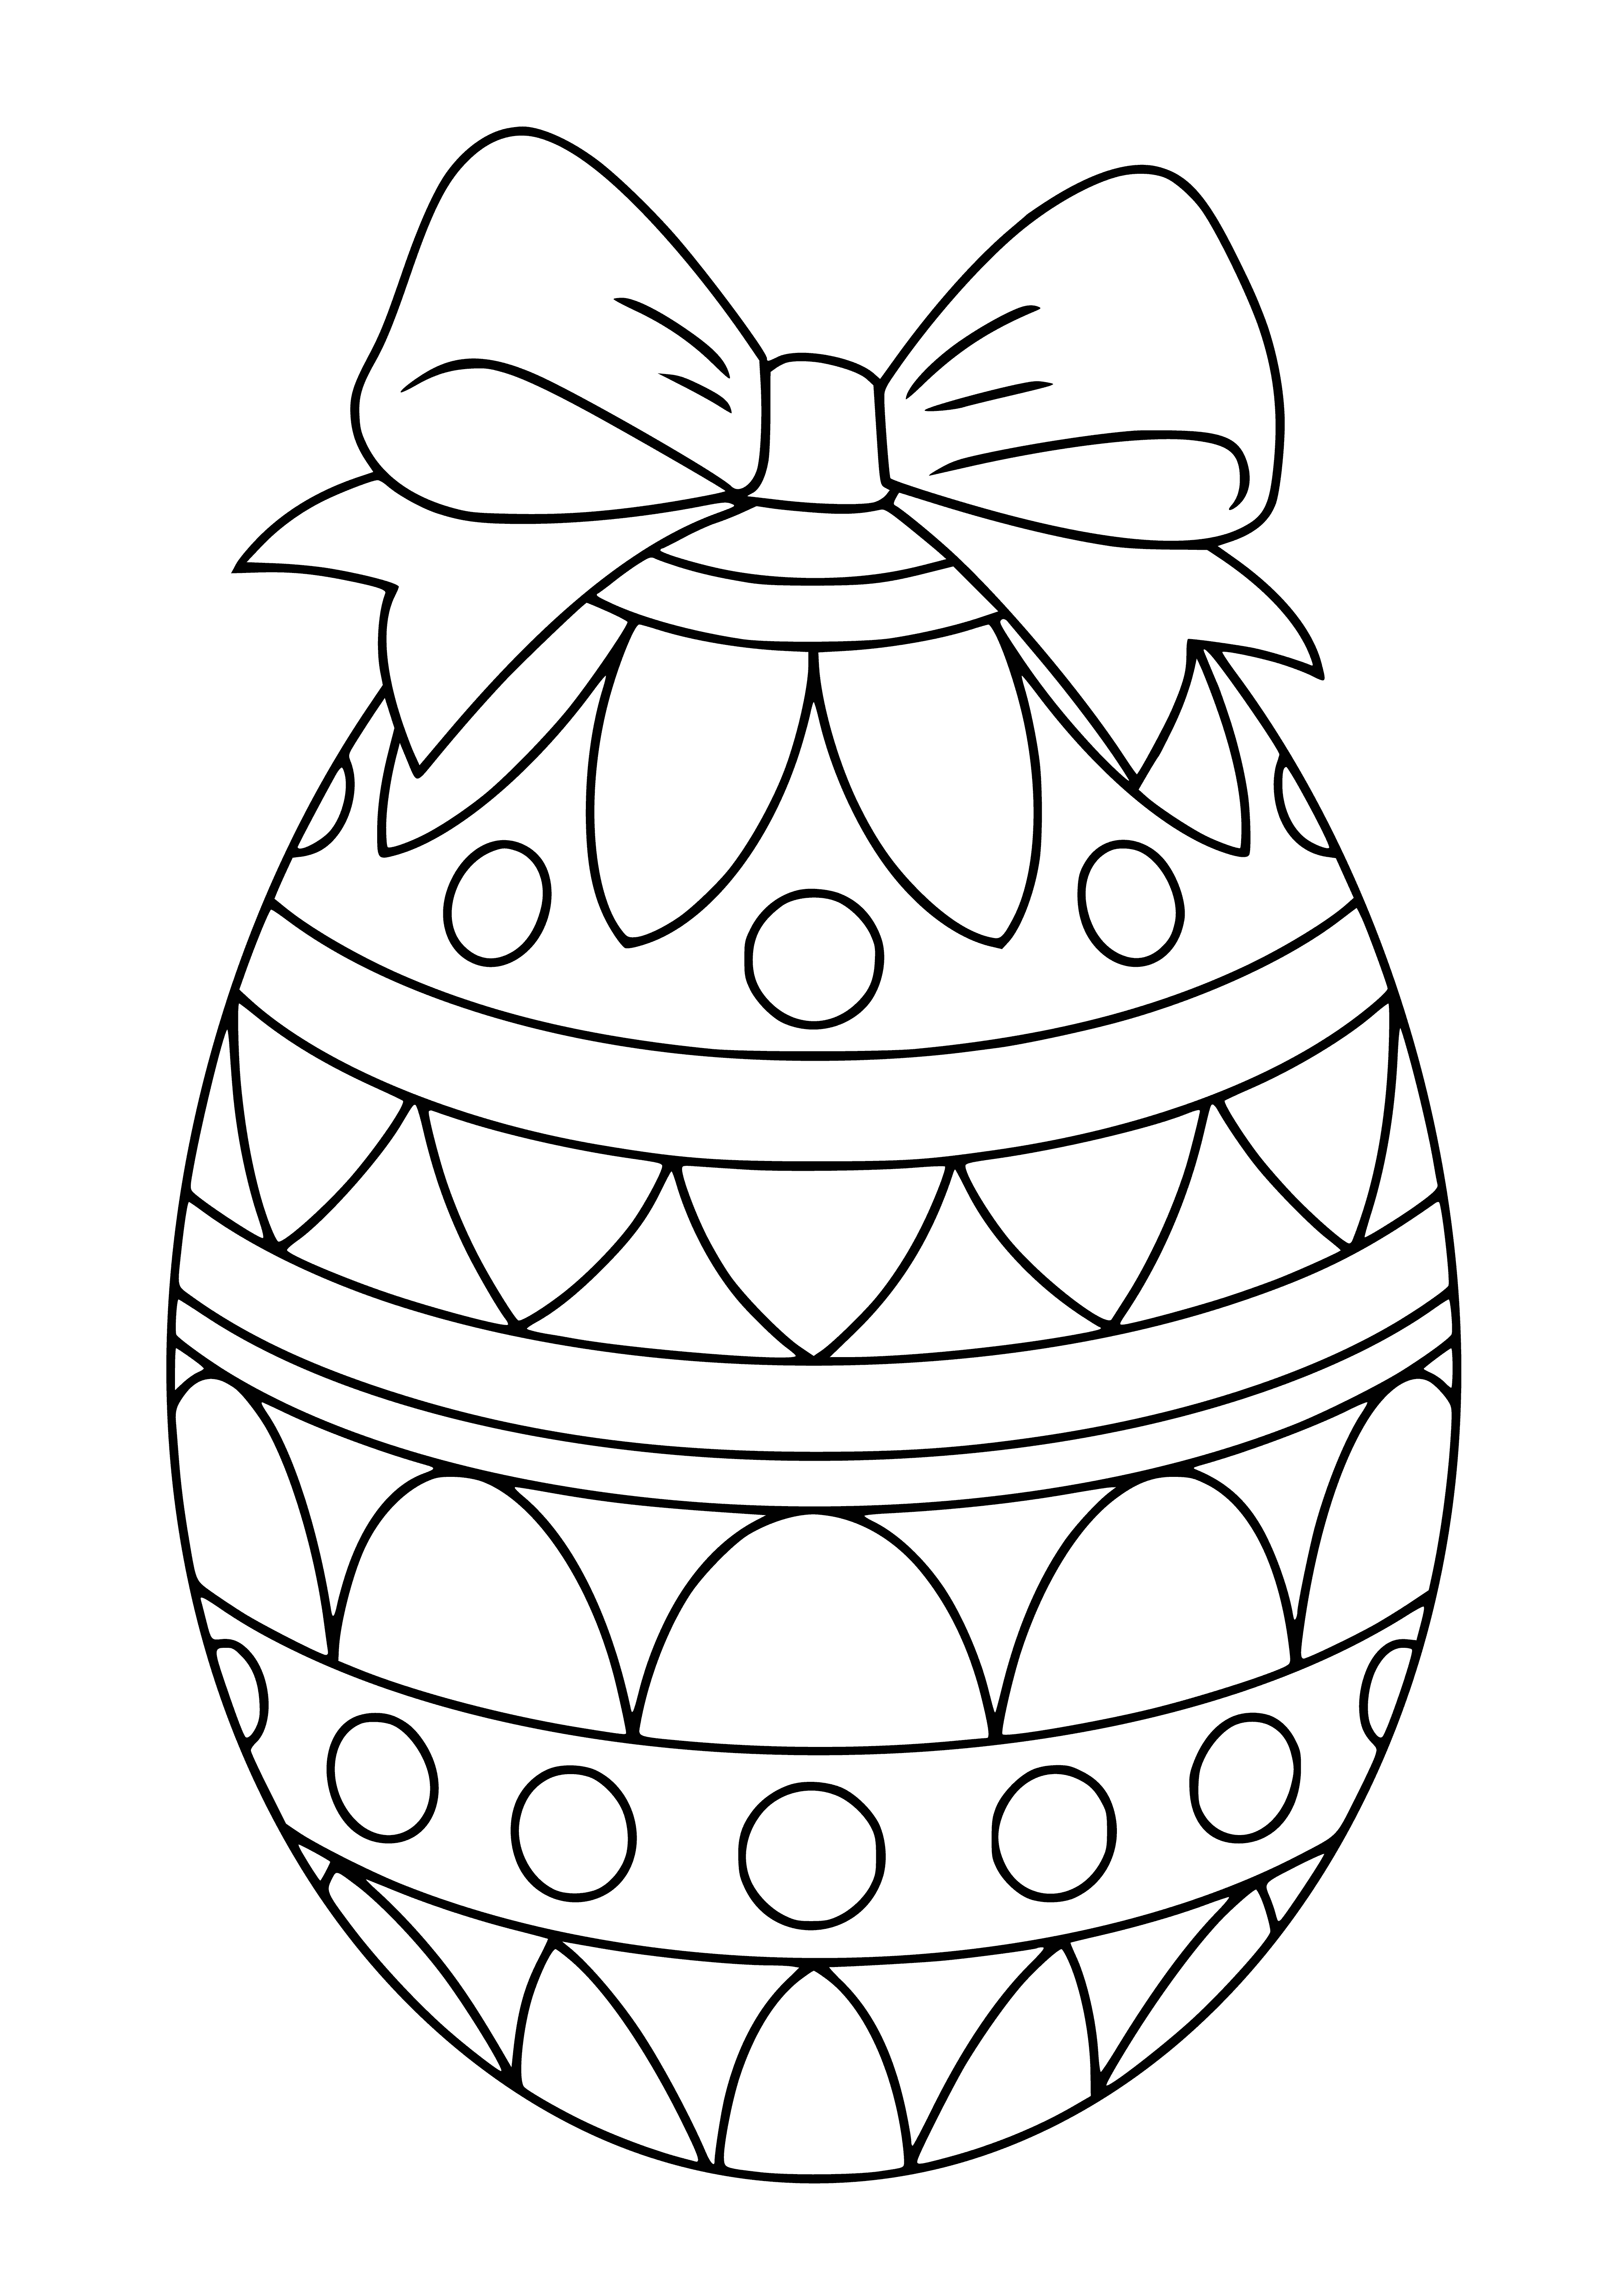 coloring page: A large bright yellow Easter egg, topped with a green and pink polka dot bow. #EasterEggs